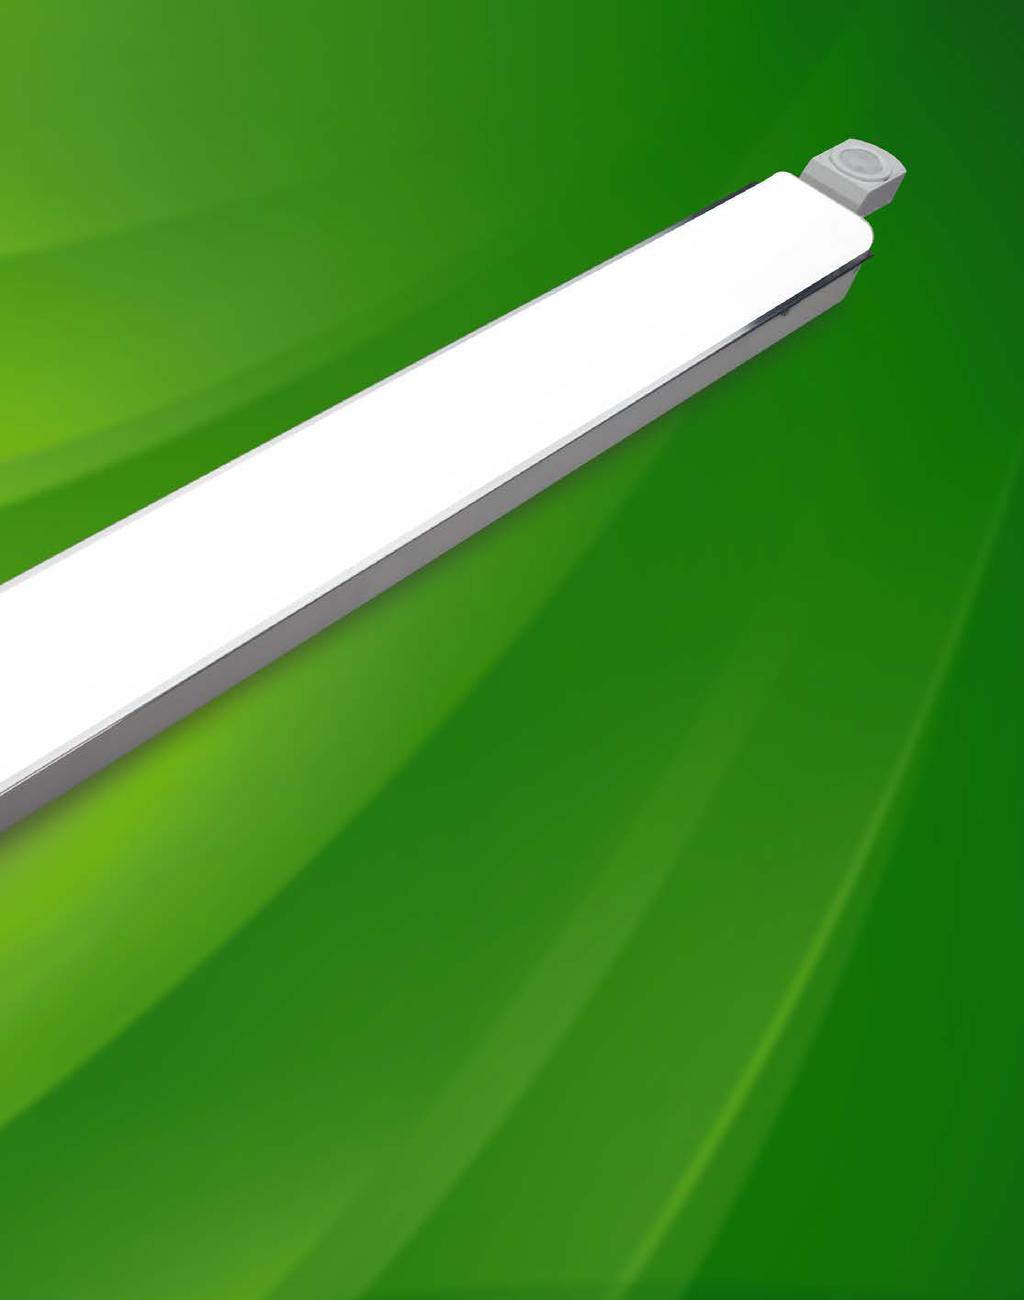 Bi-level Step Dimming sensors can be combined for additional energy savings